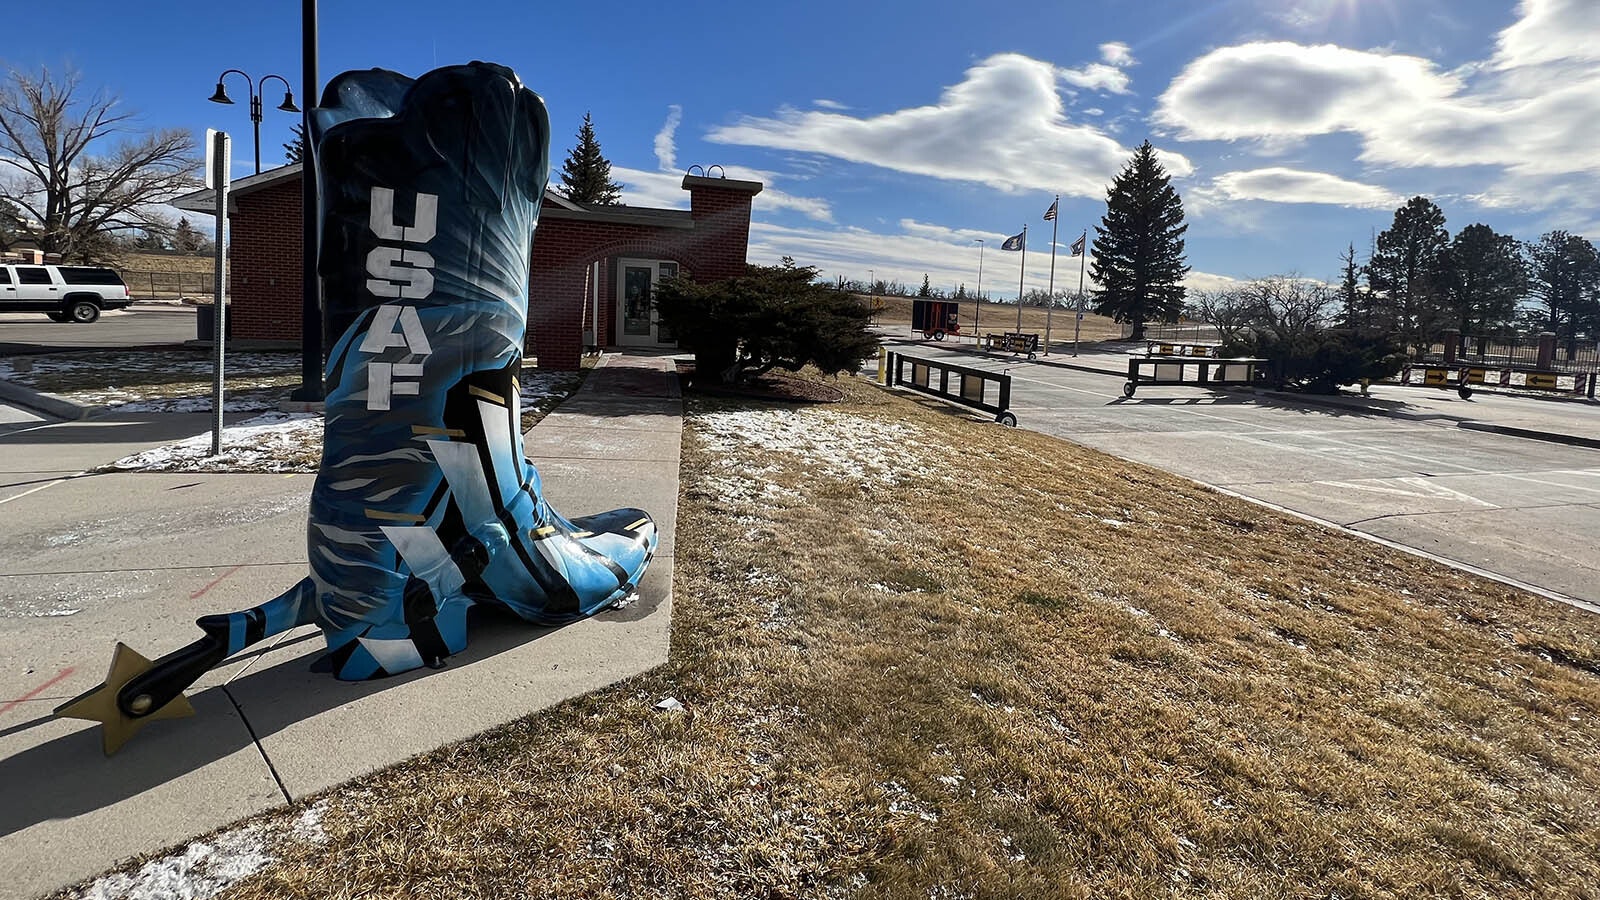 A new Big Boot in Cheyenne's collection celebrates F.E. Warren Air Force Base and the USAF in Wyoming's capital city.